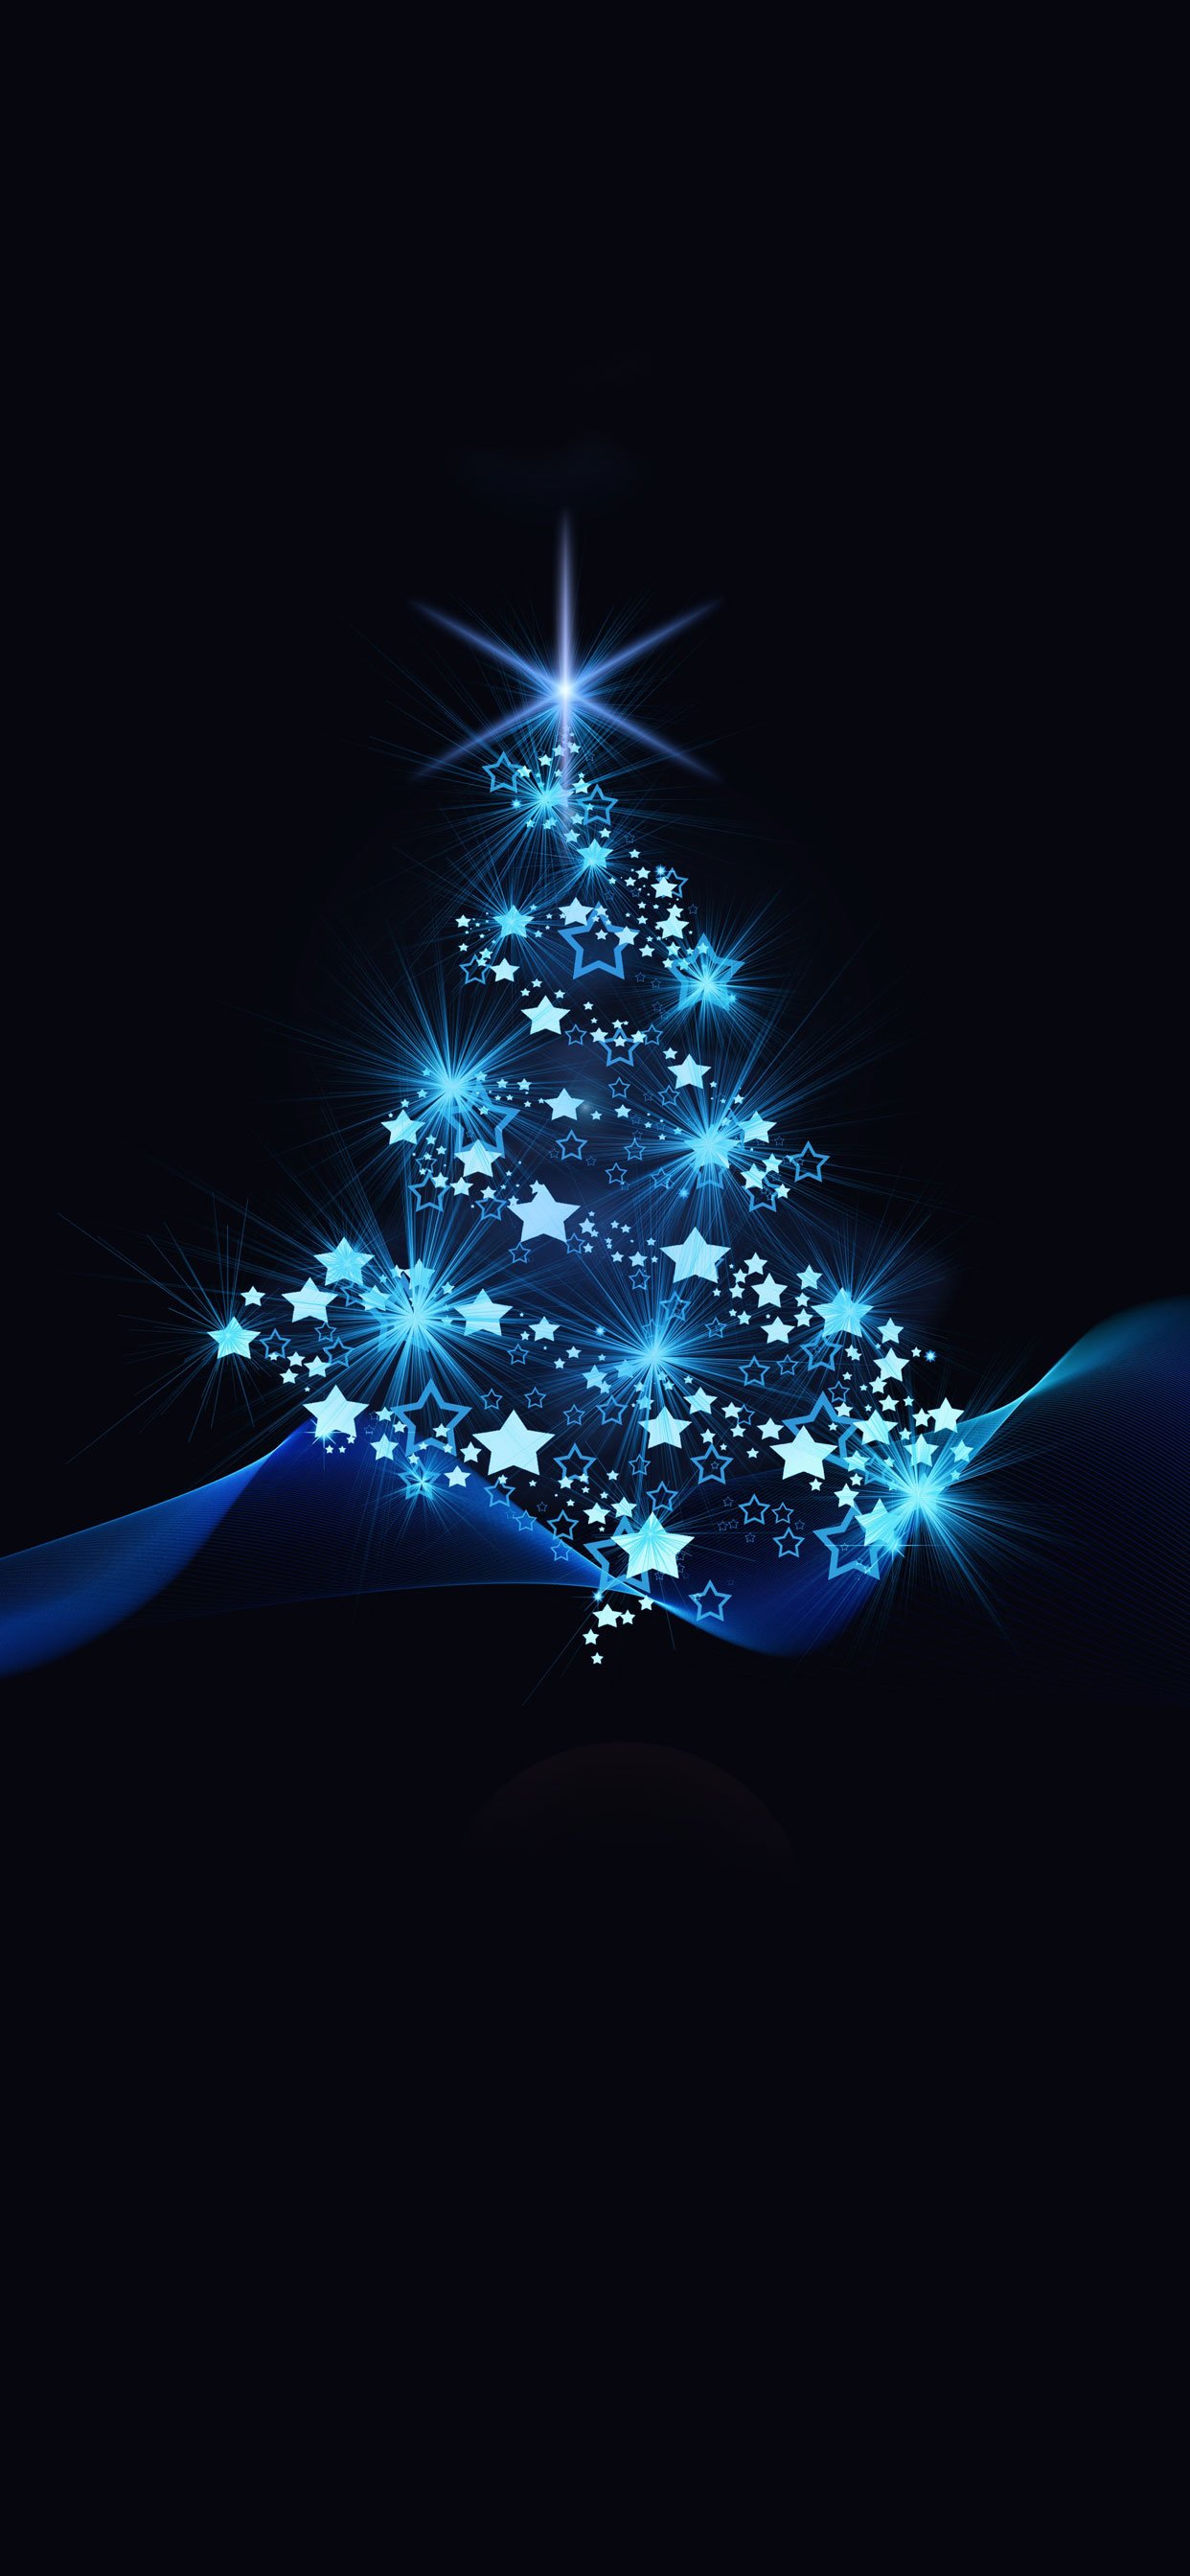 40 Beautiful Iphone 11 Pro Max Christmas Wallpapers Backgrounds